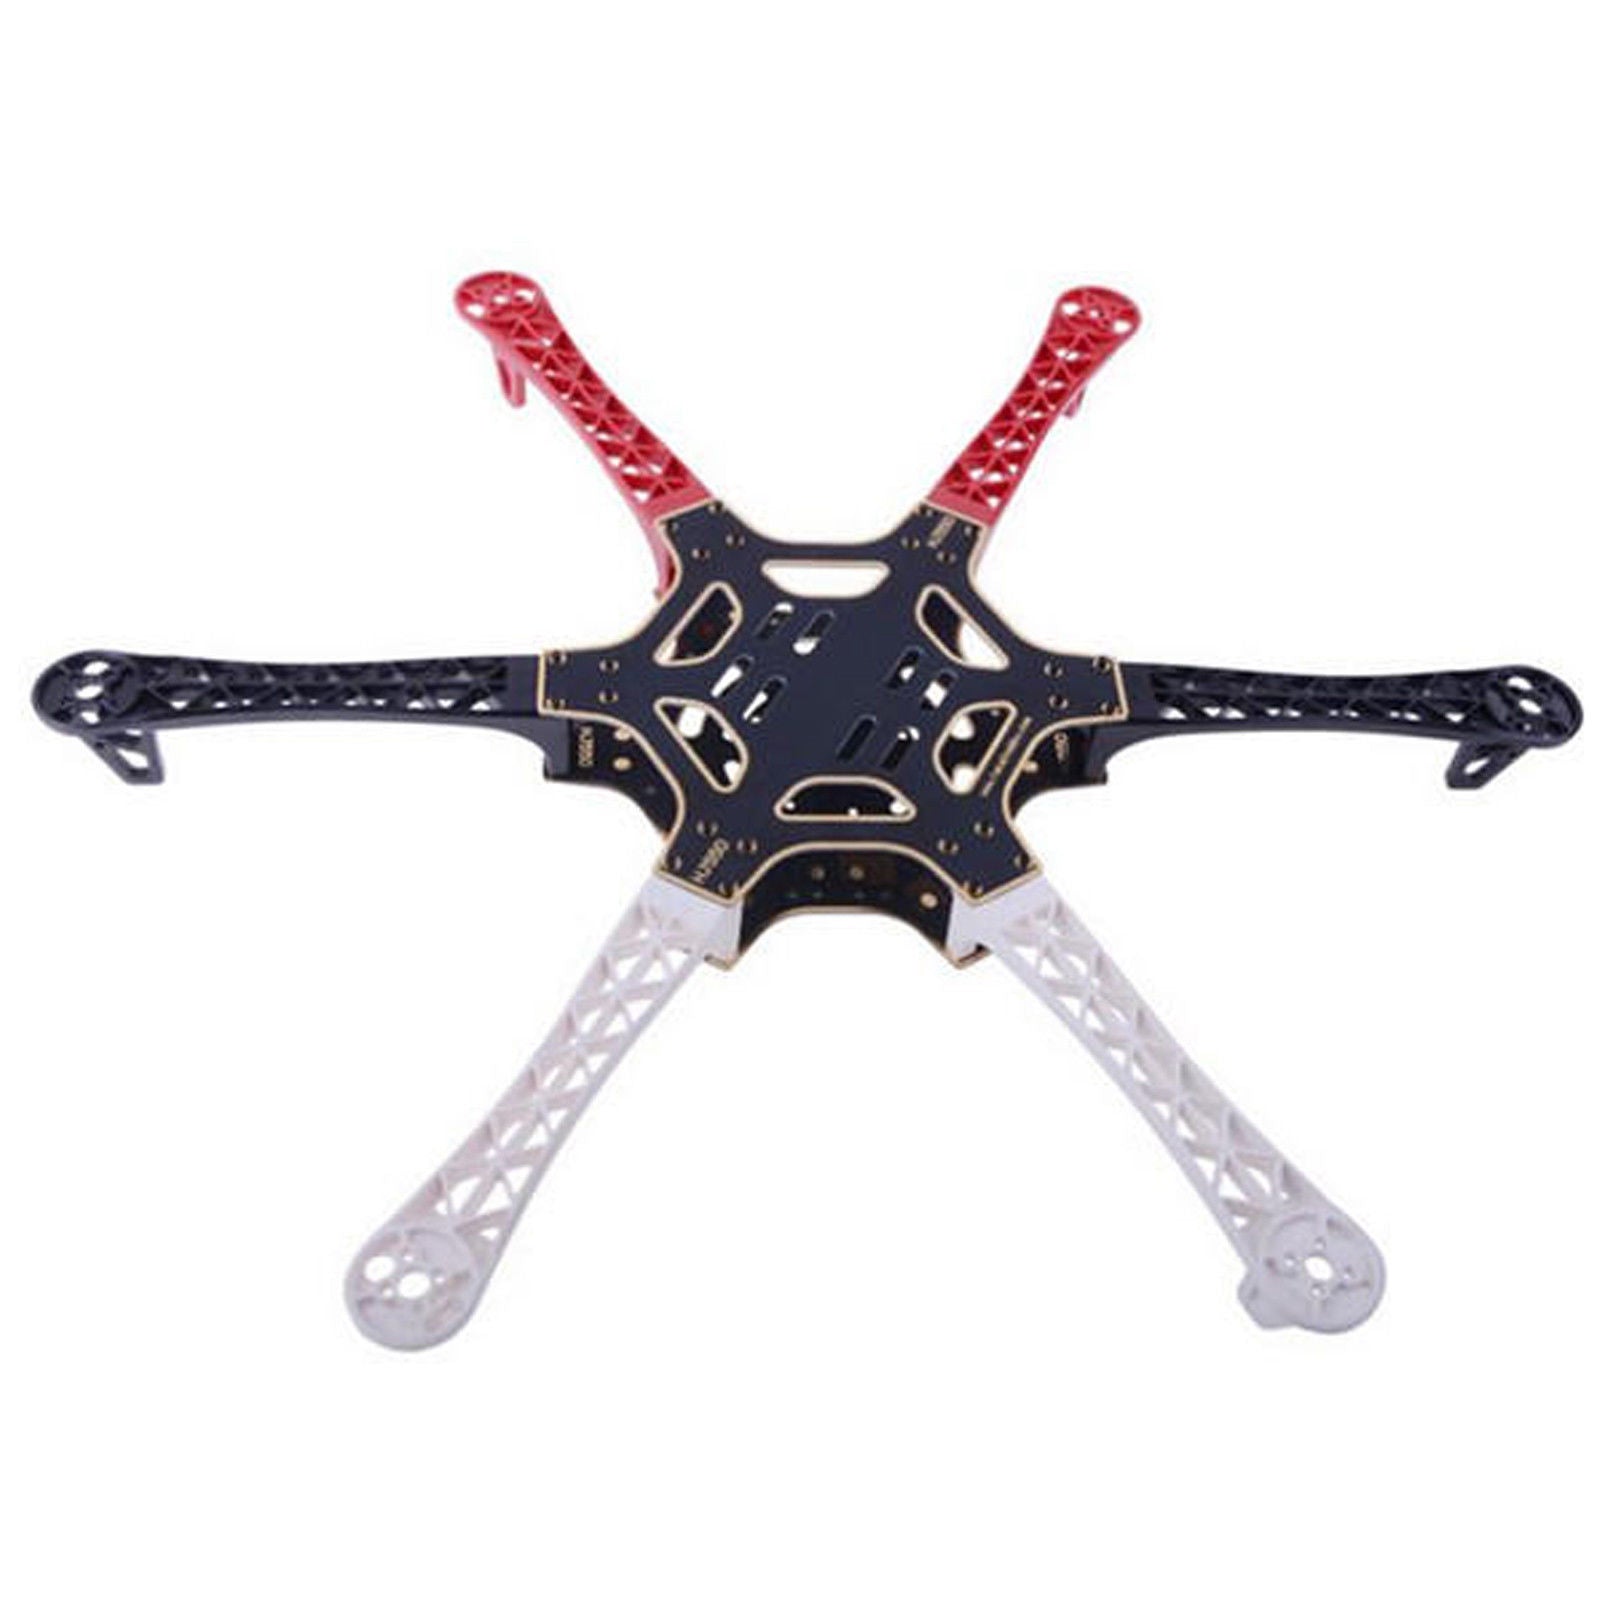 Rotere matchmaker stress F550 550mm Hexacopter Drone Frame Integrated Power Distribution Board |  SpeedyFPV